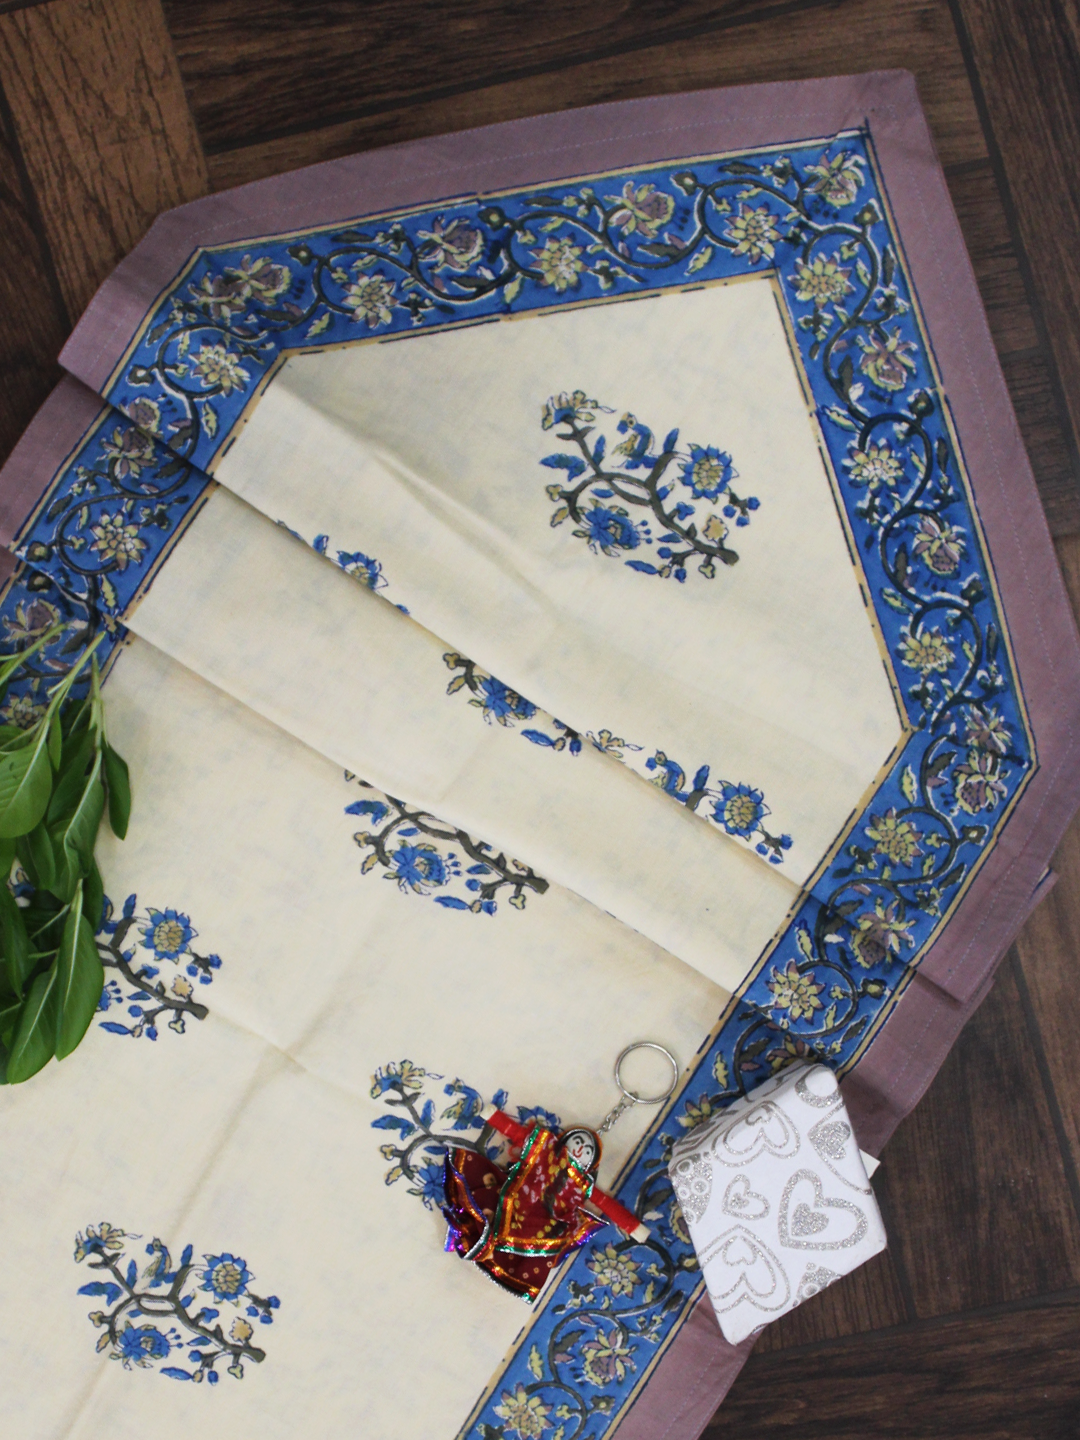 Beige and Blue Floral Print Cotton Reversible Table Runner